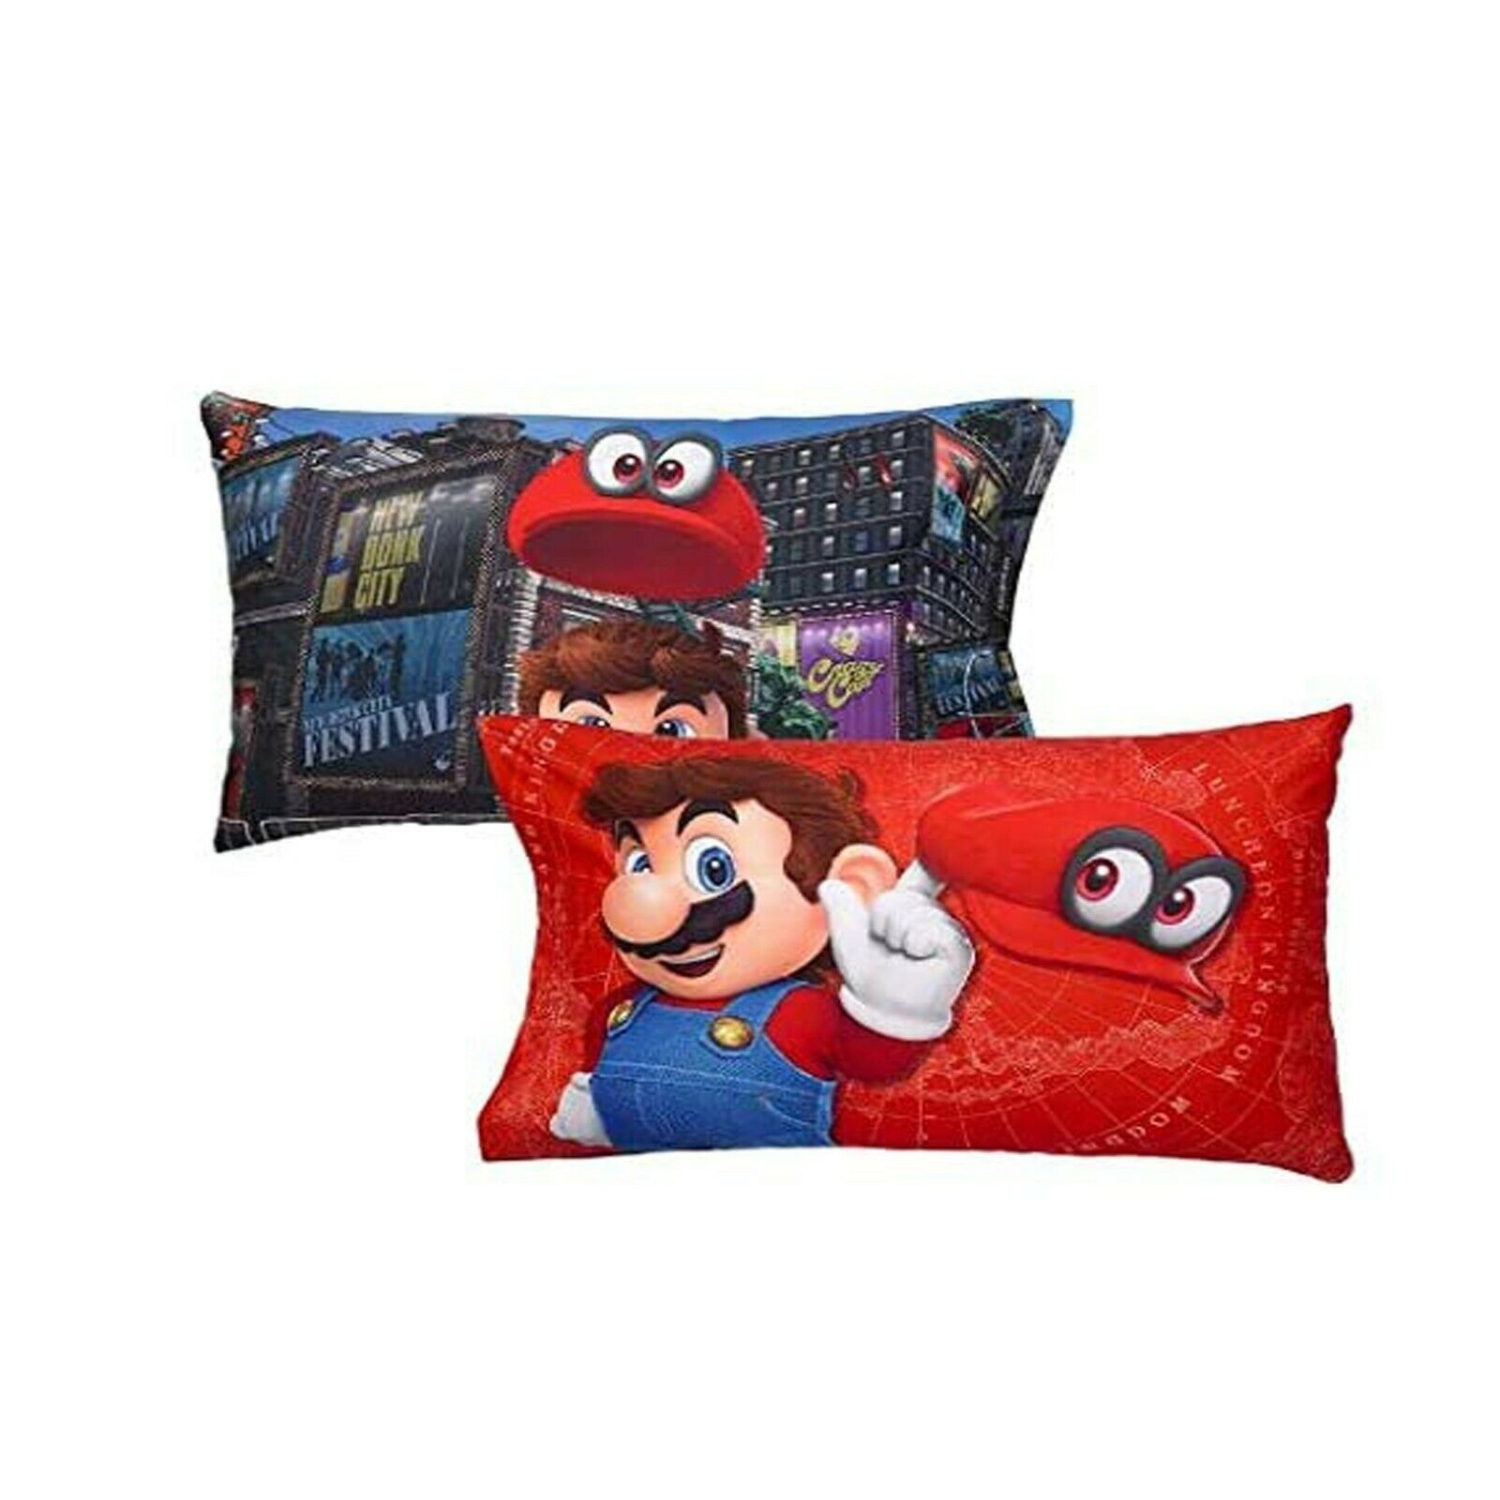 Super Mario Odyssey Reversible Pillowcase for Kids - 20 X 30 Inch (1 Piece)